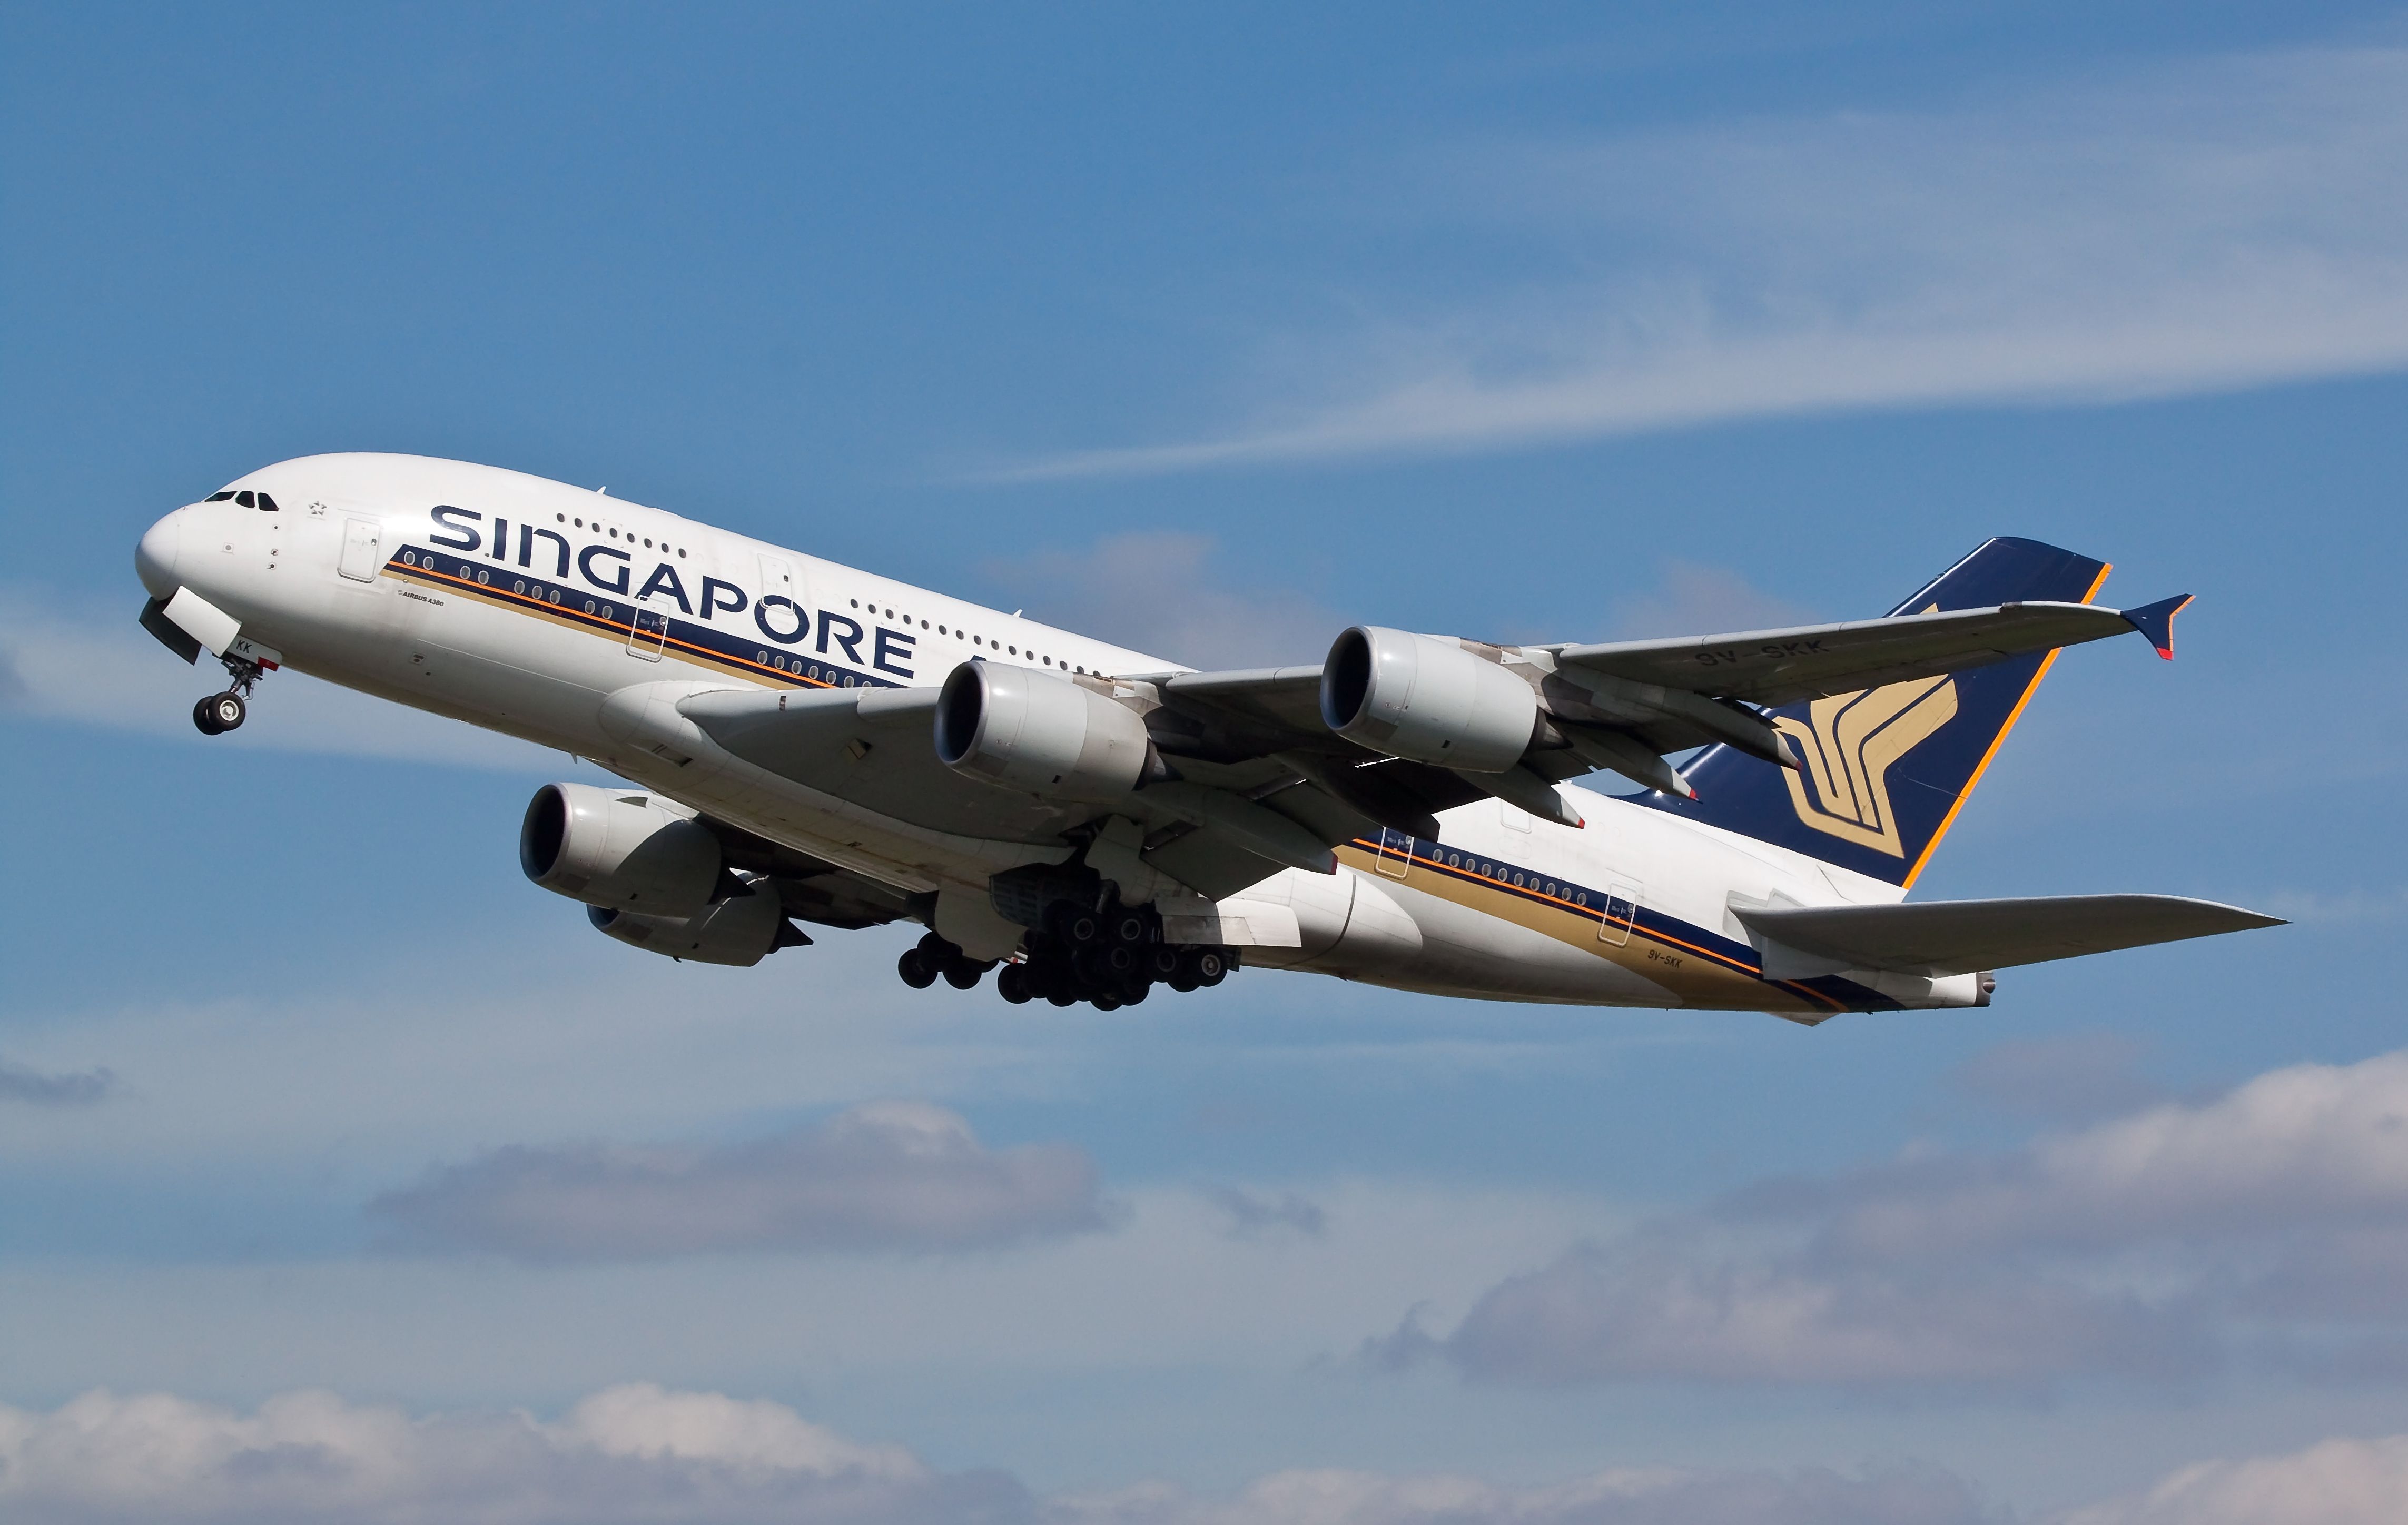 Singapore Airlines Airbus A380 at LHR